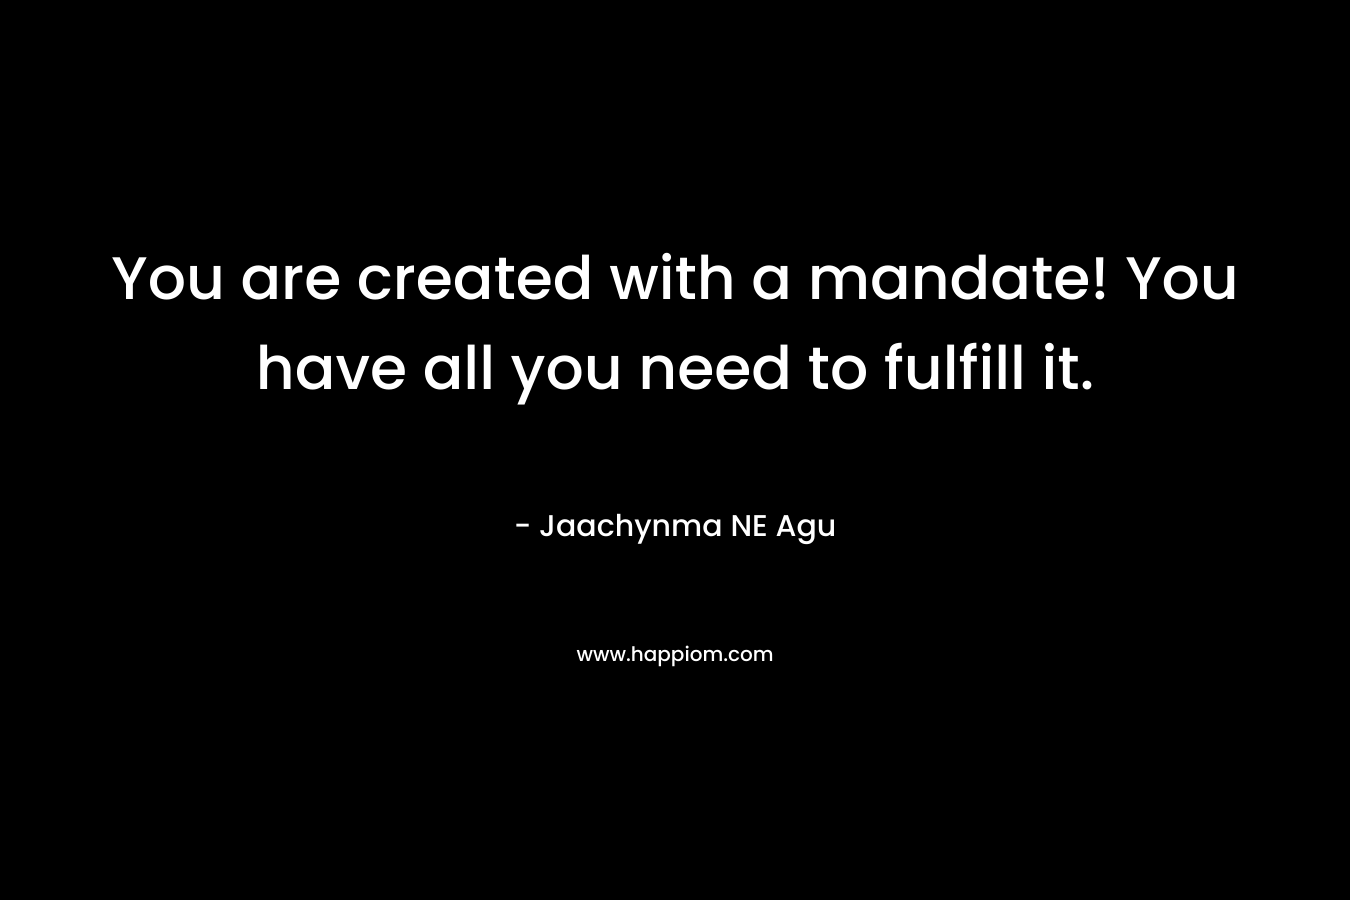 You are created with a mandate! You have all you need to fulfill it.